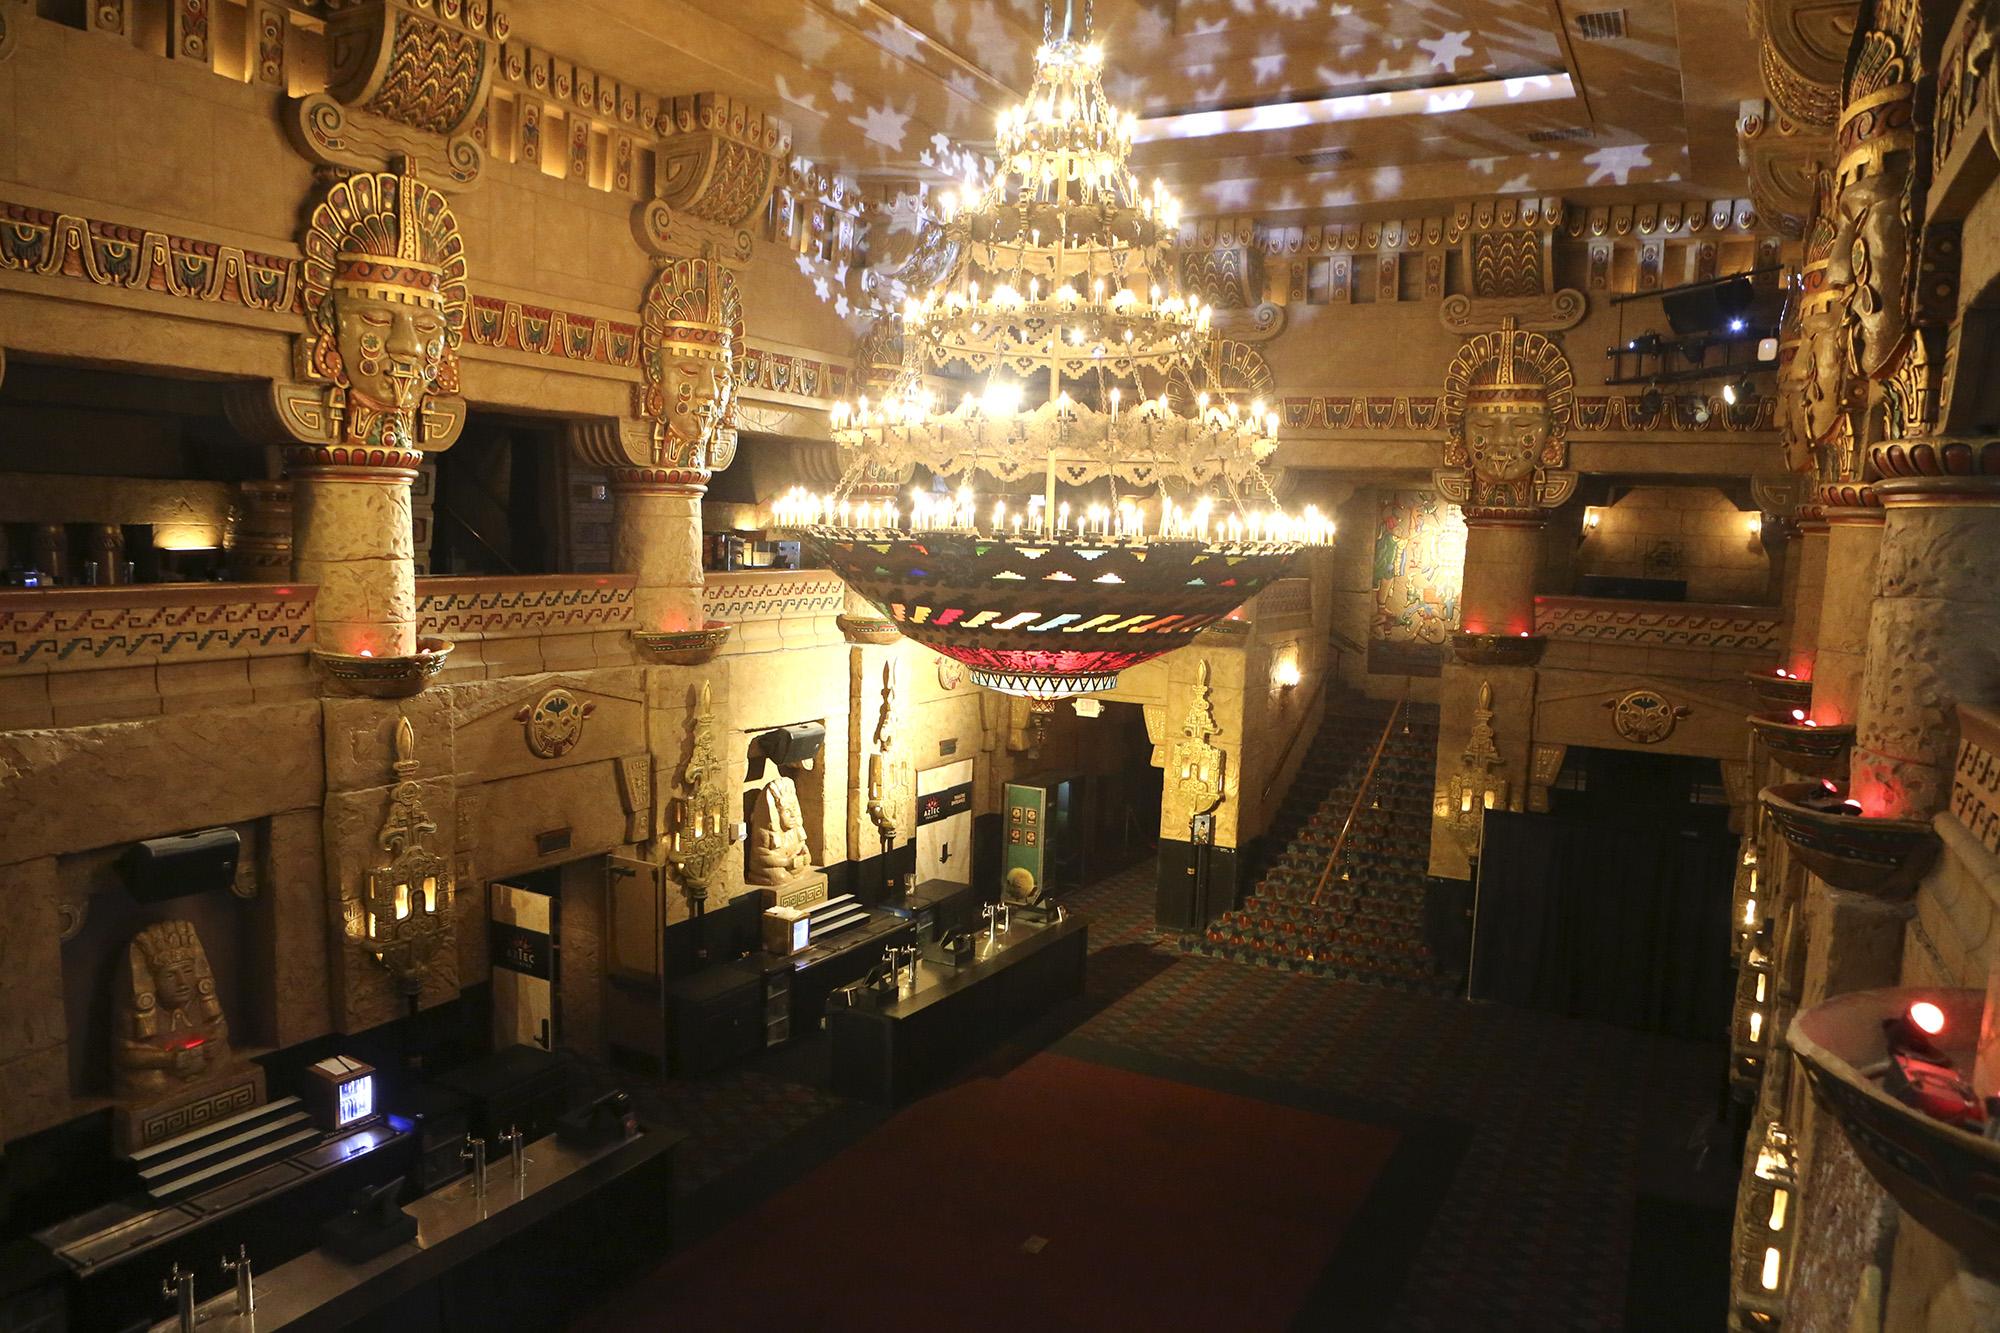 Former downtown movie palace now a live entertainment venue